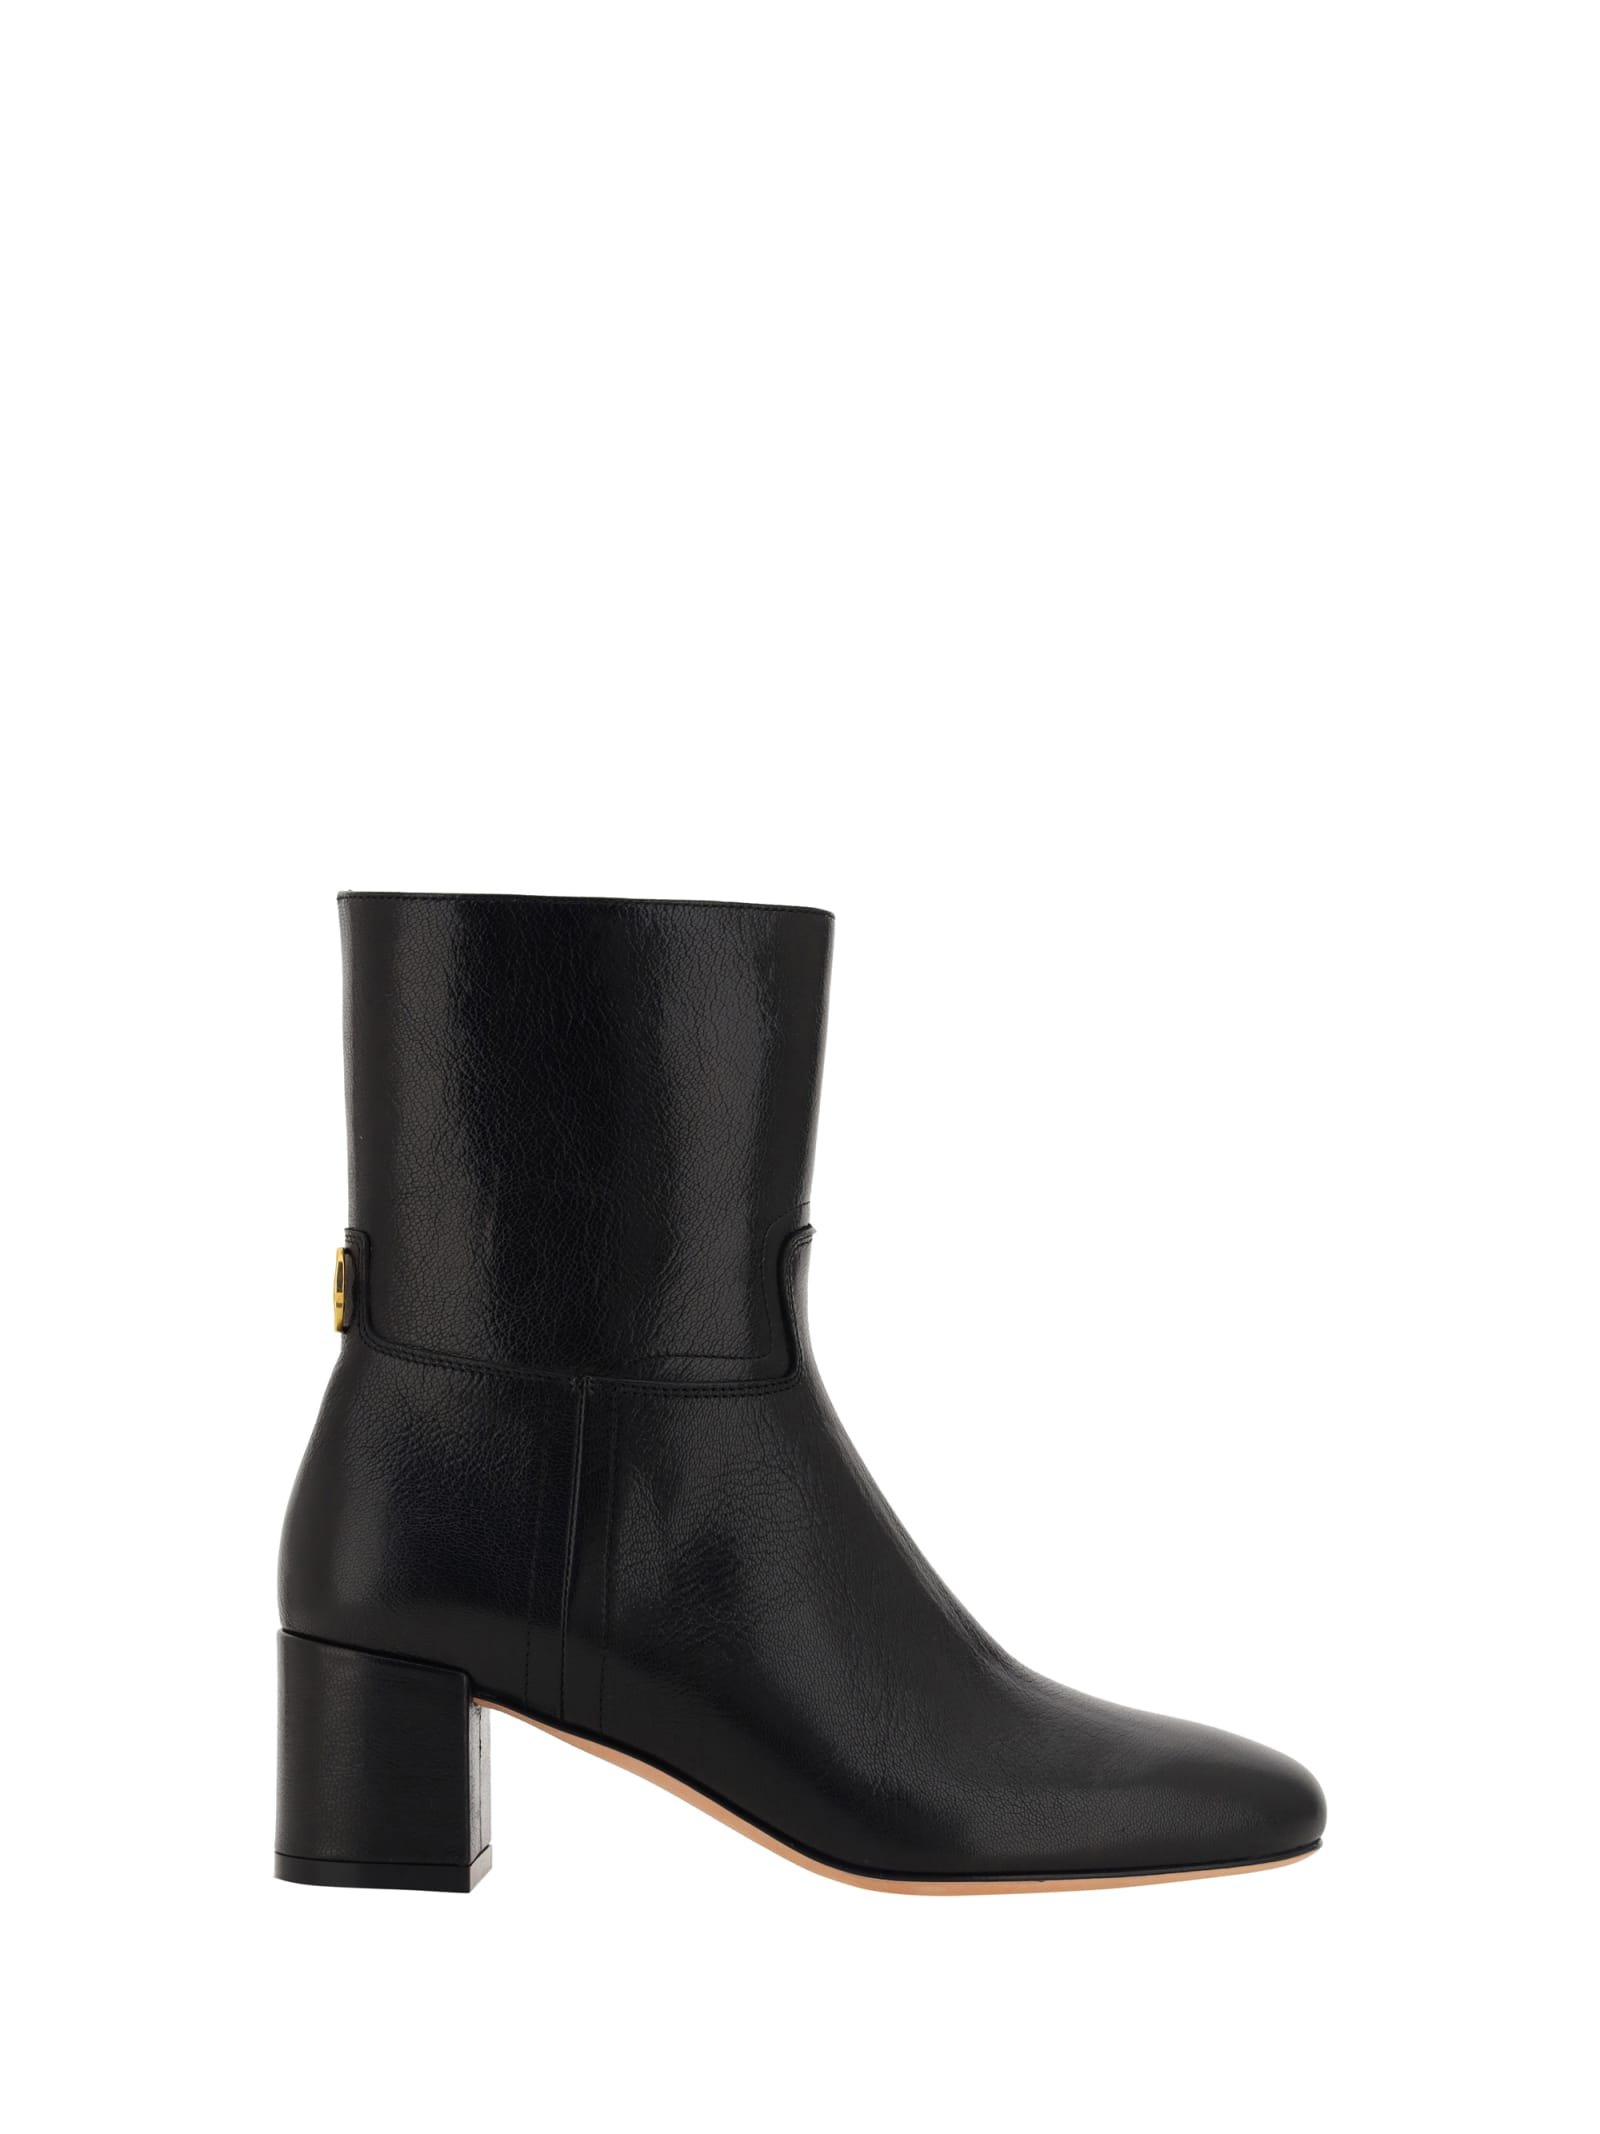 BALLY HEELED ANKLE BOOTS